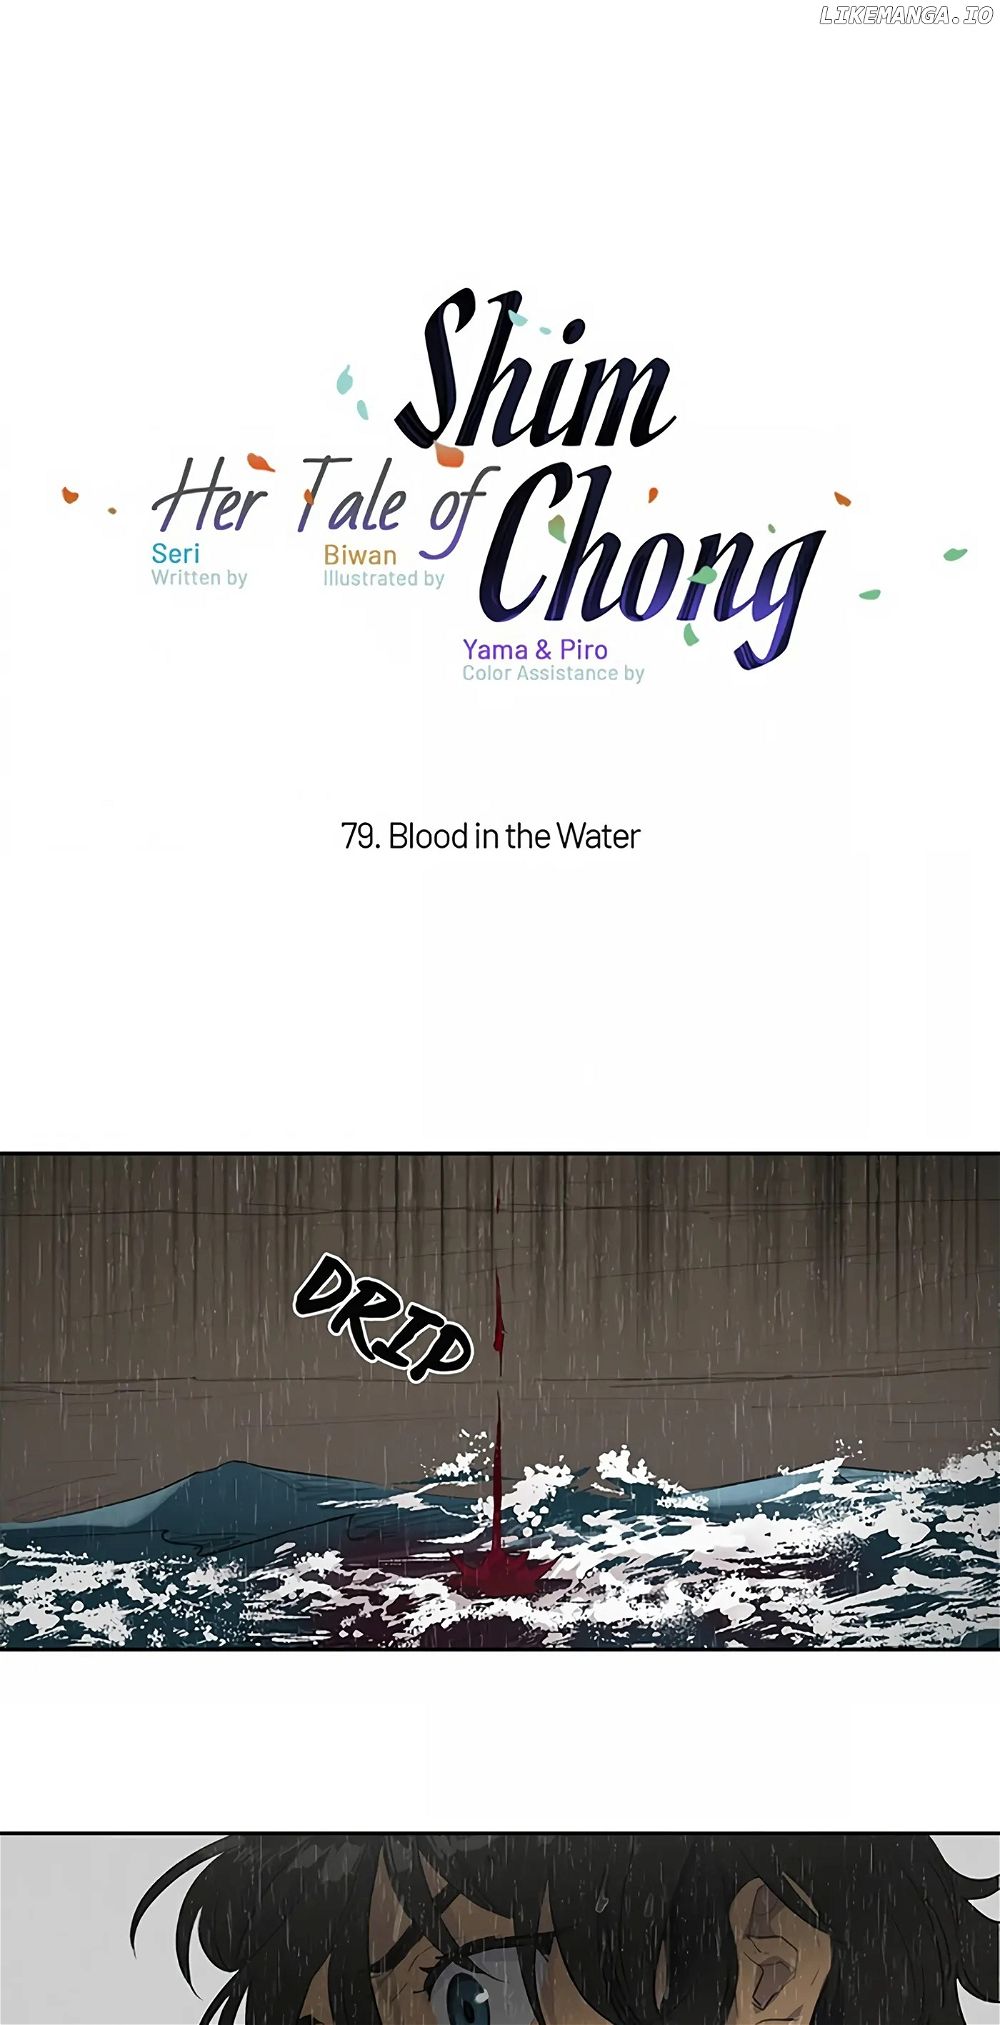 Her Tale of Shim Chong Chapter 79 - Page 1